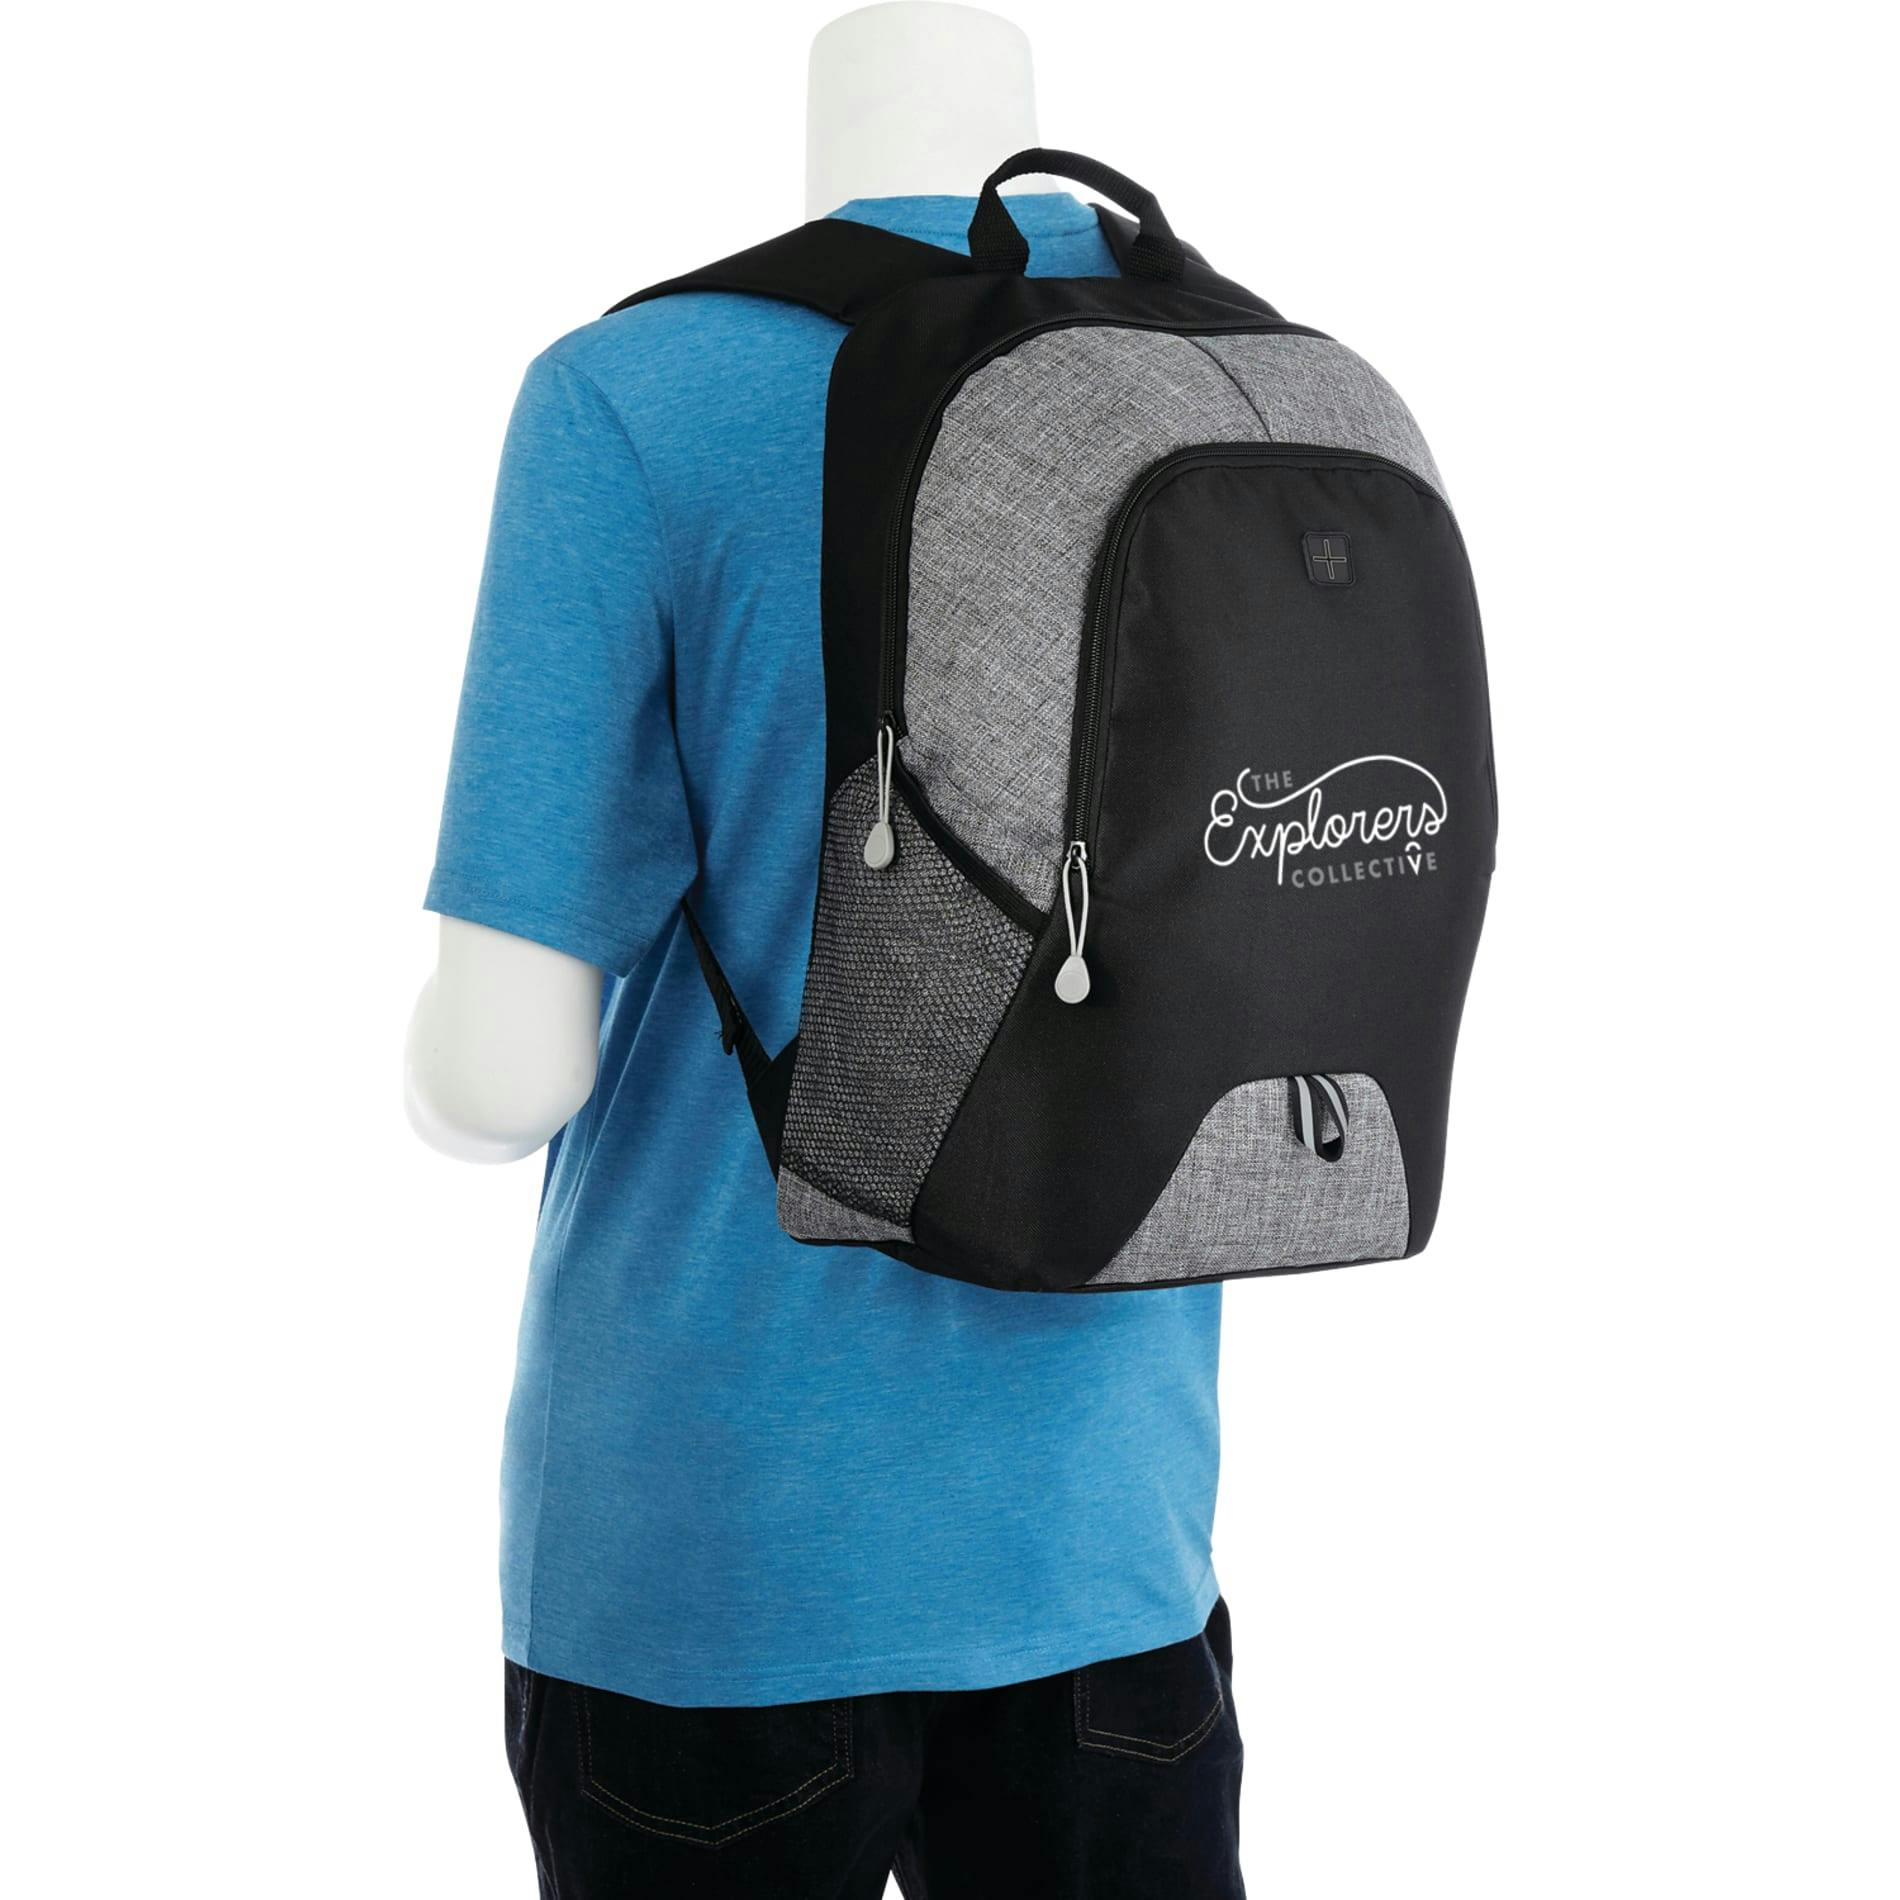 Pier 15" Computer Backpack - additional Image 1